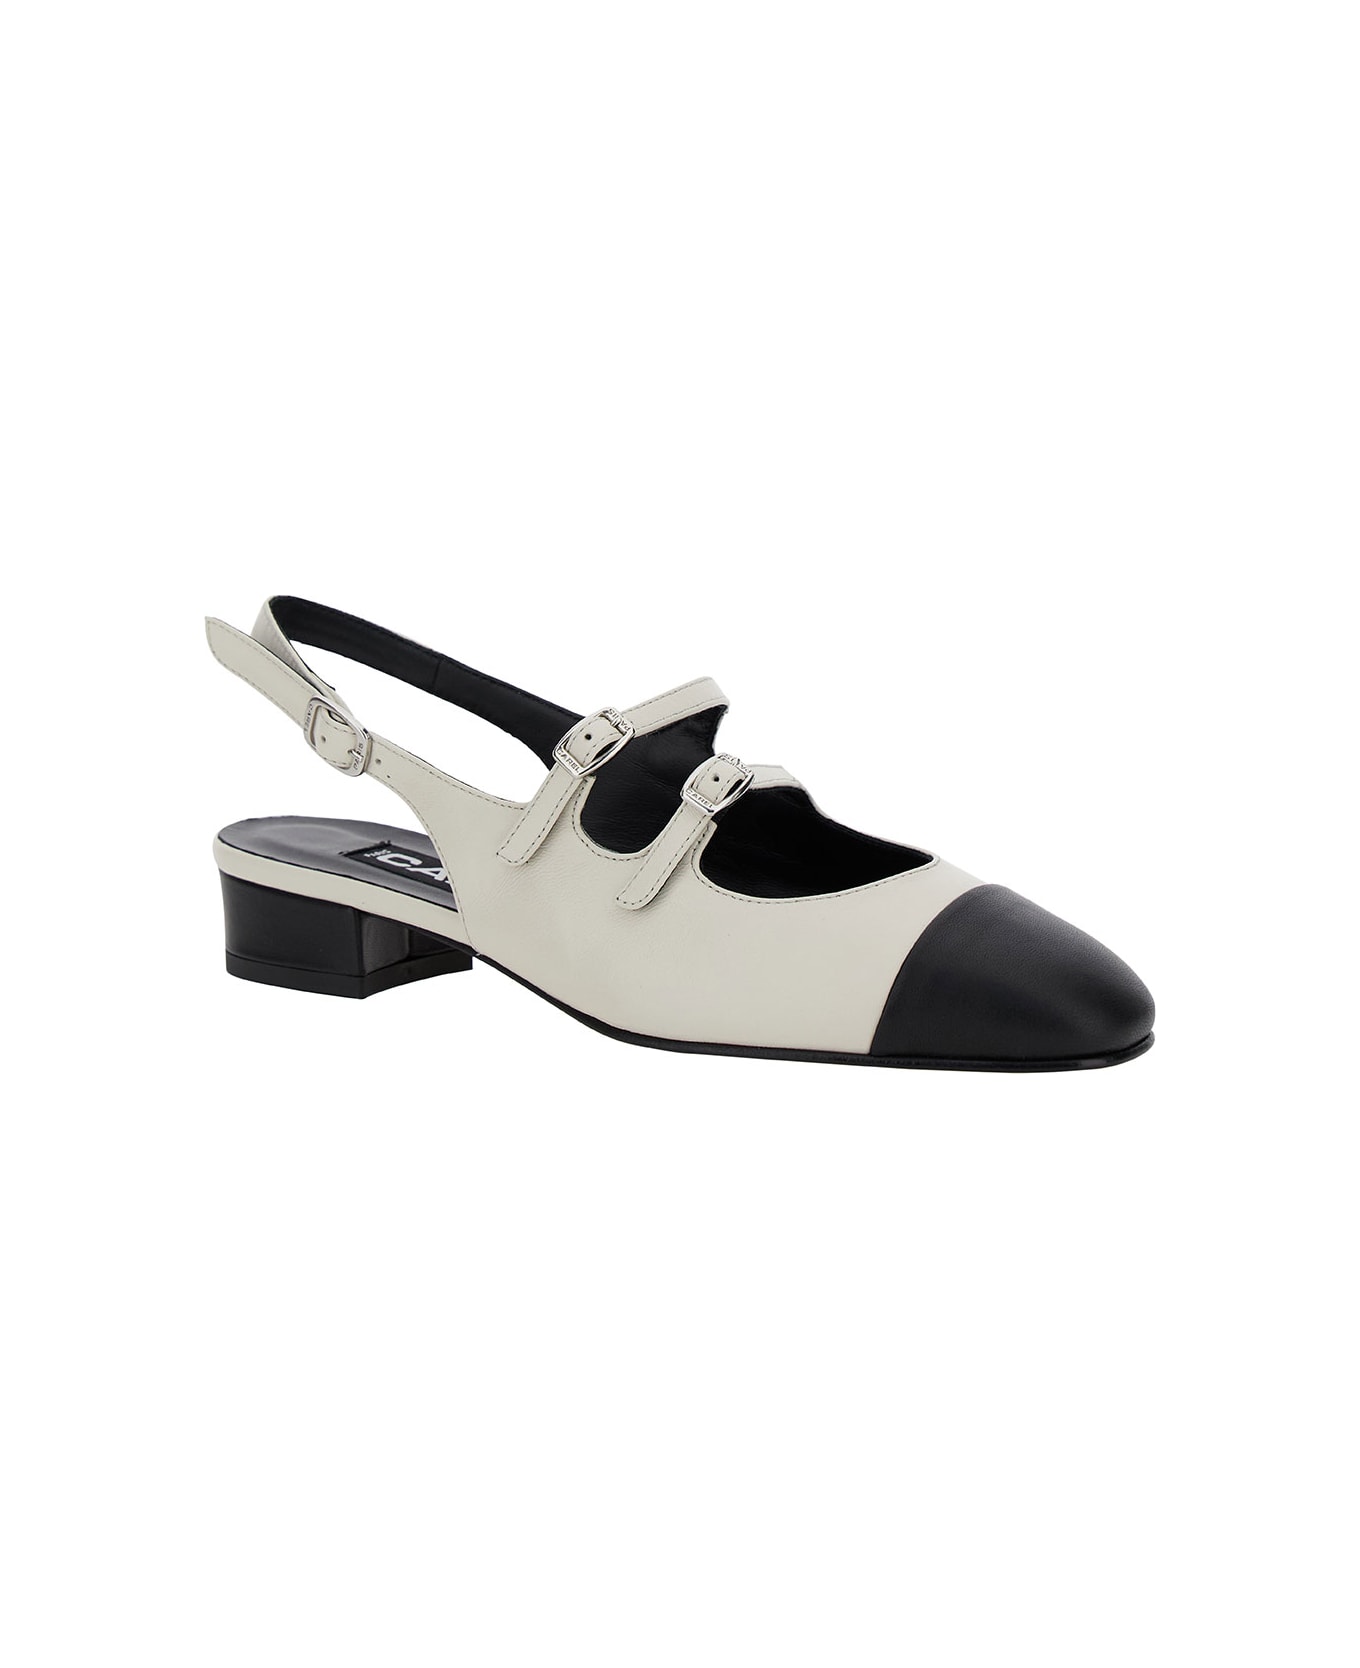 Carel 'abricot' White Slingback Mary Janes With Contrasting Toe In Leather Woman - Beige